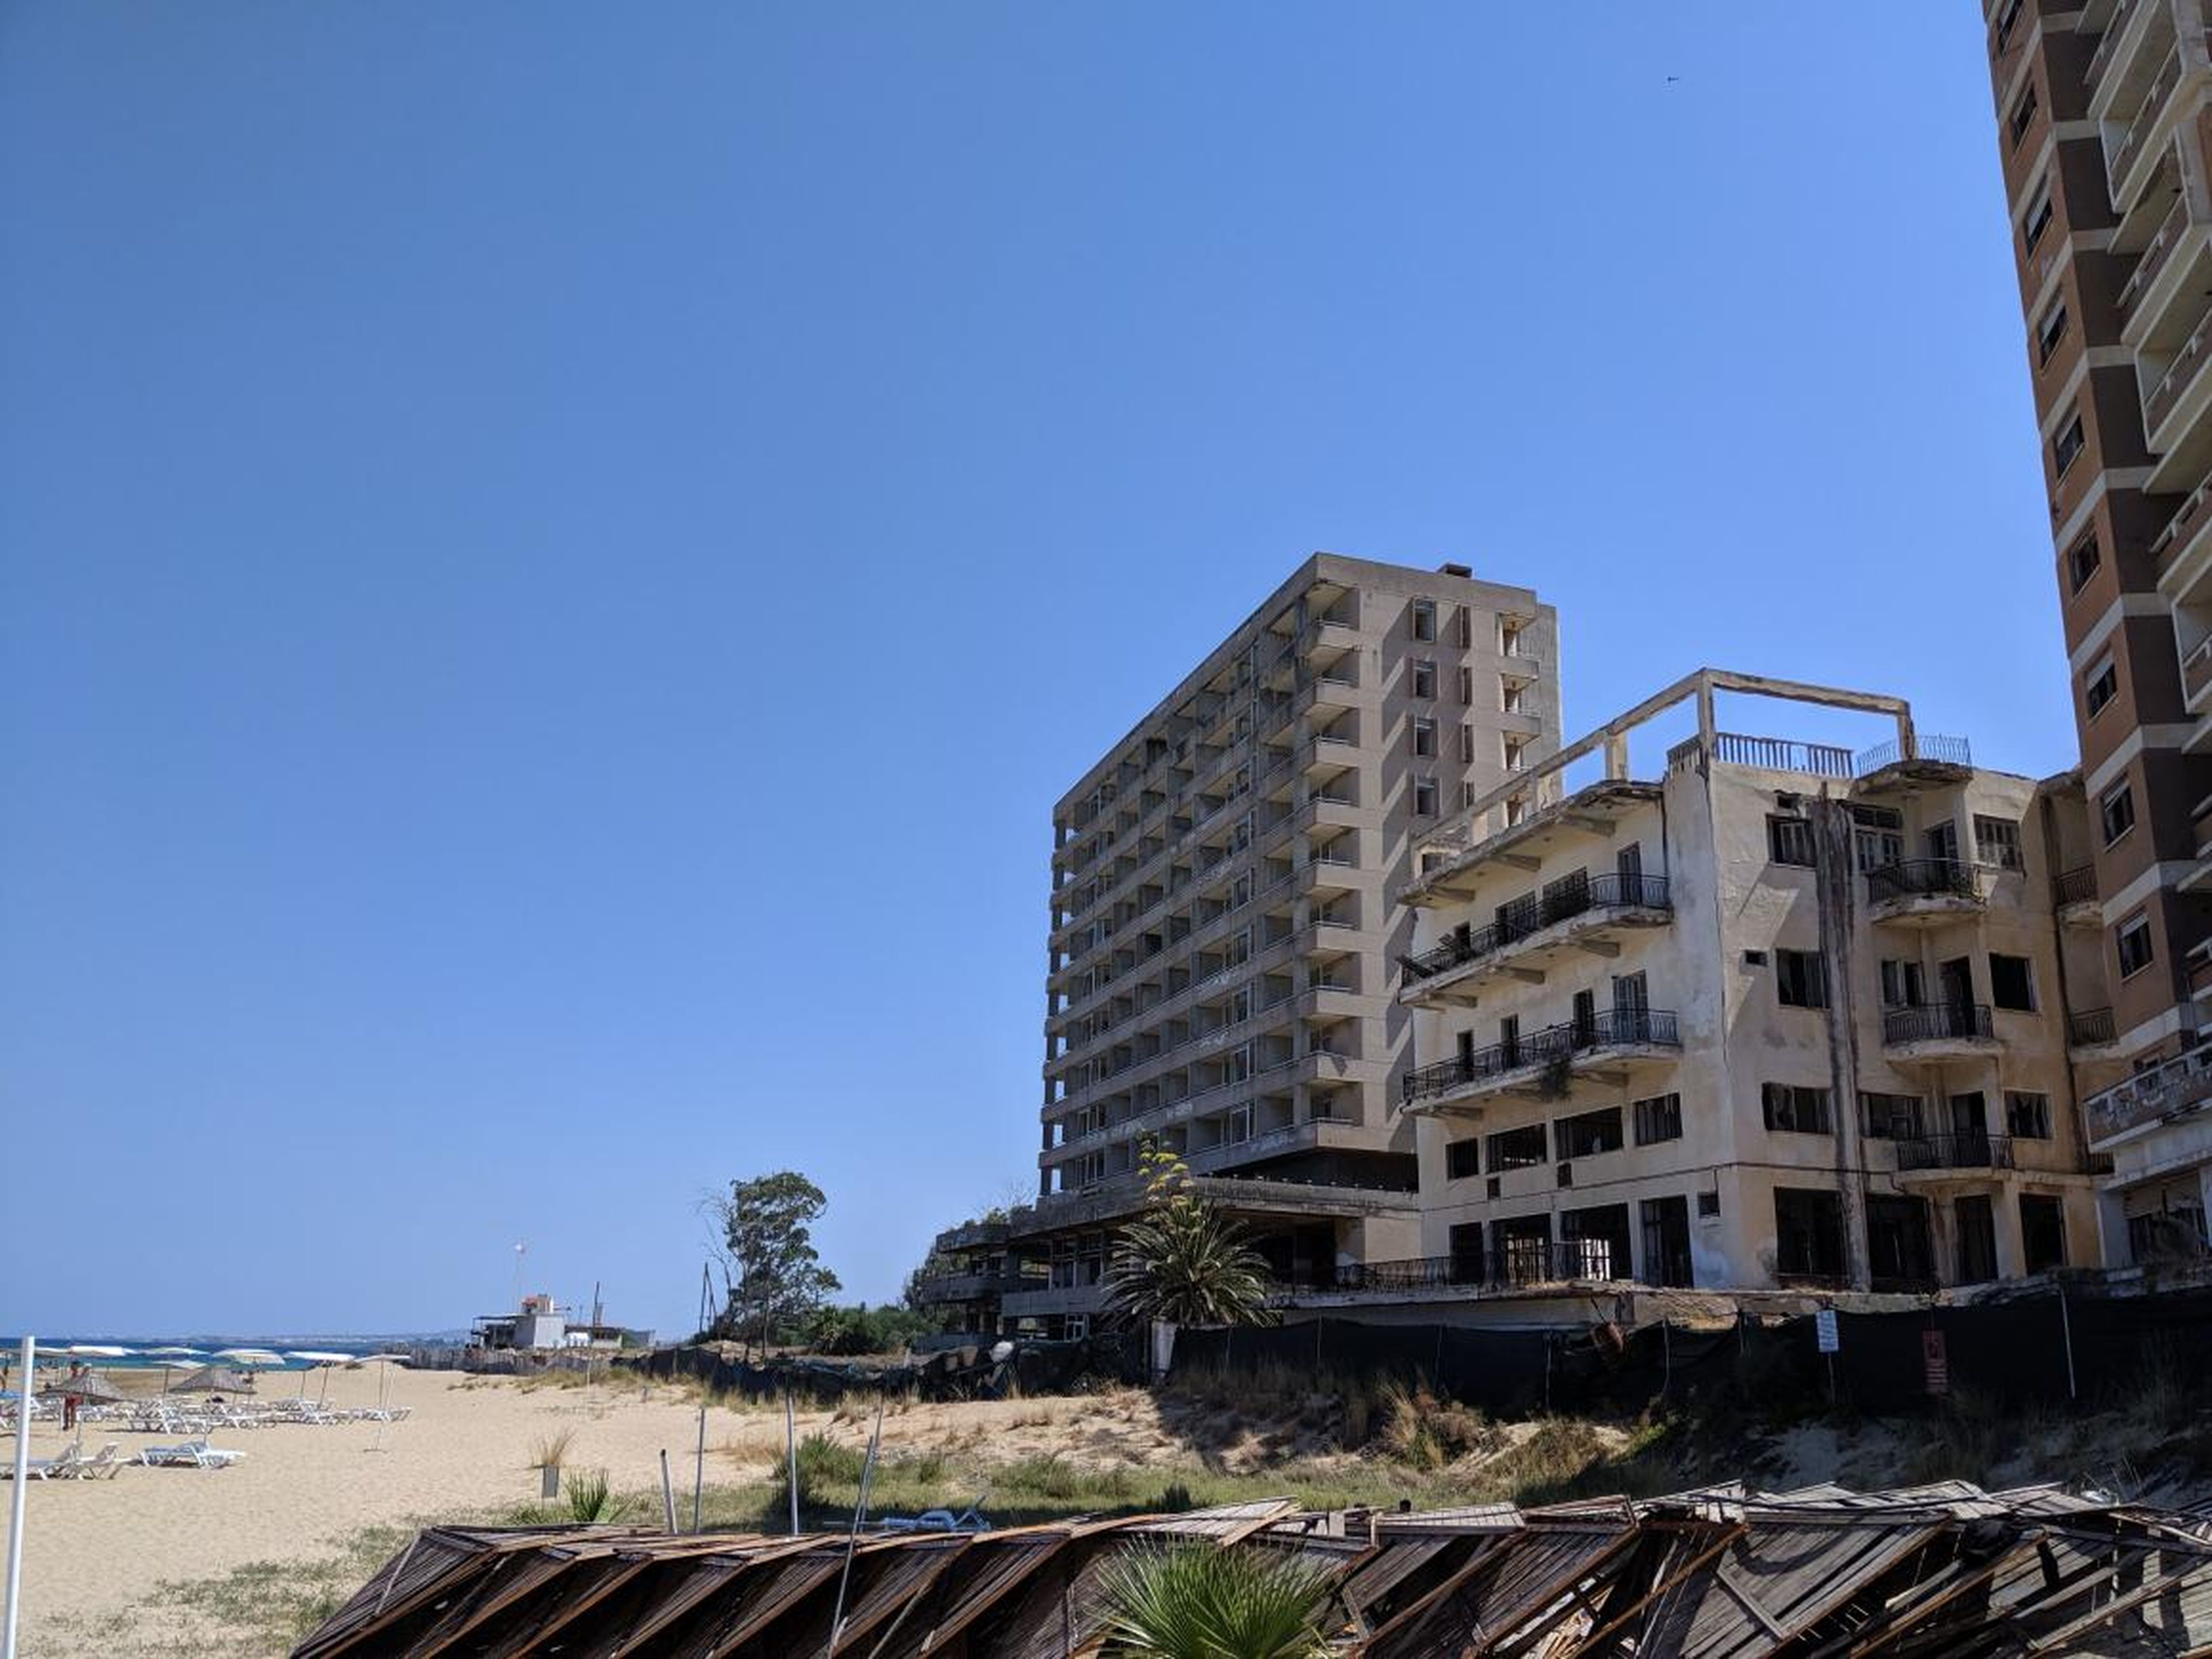 Once popular tourist destinations, these beach side hotels are now vacant.